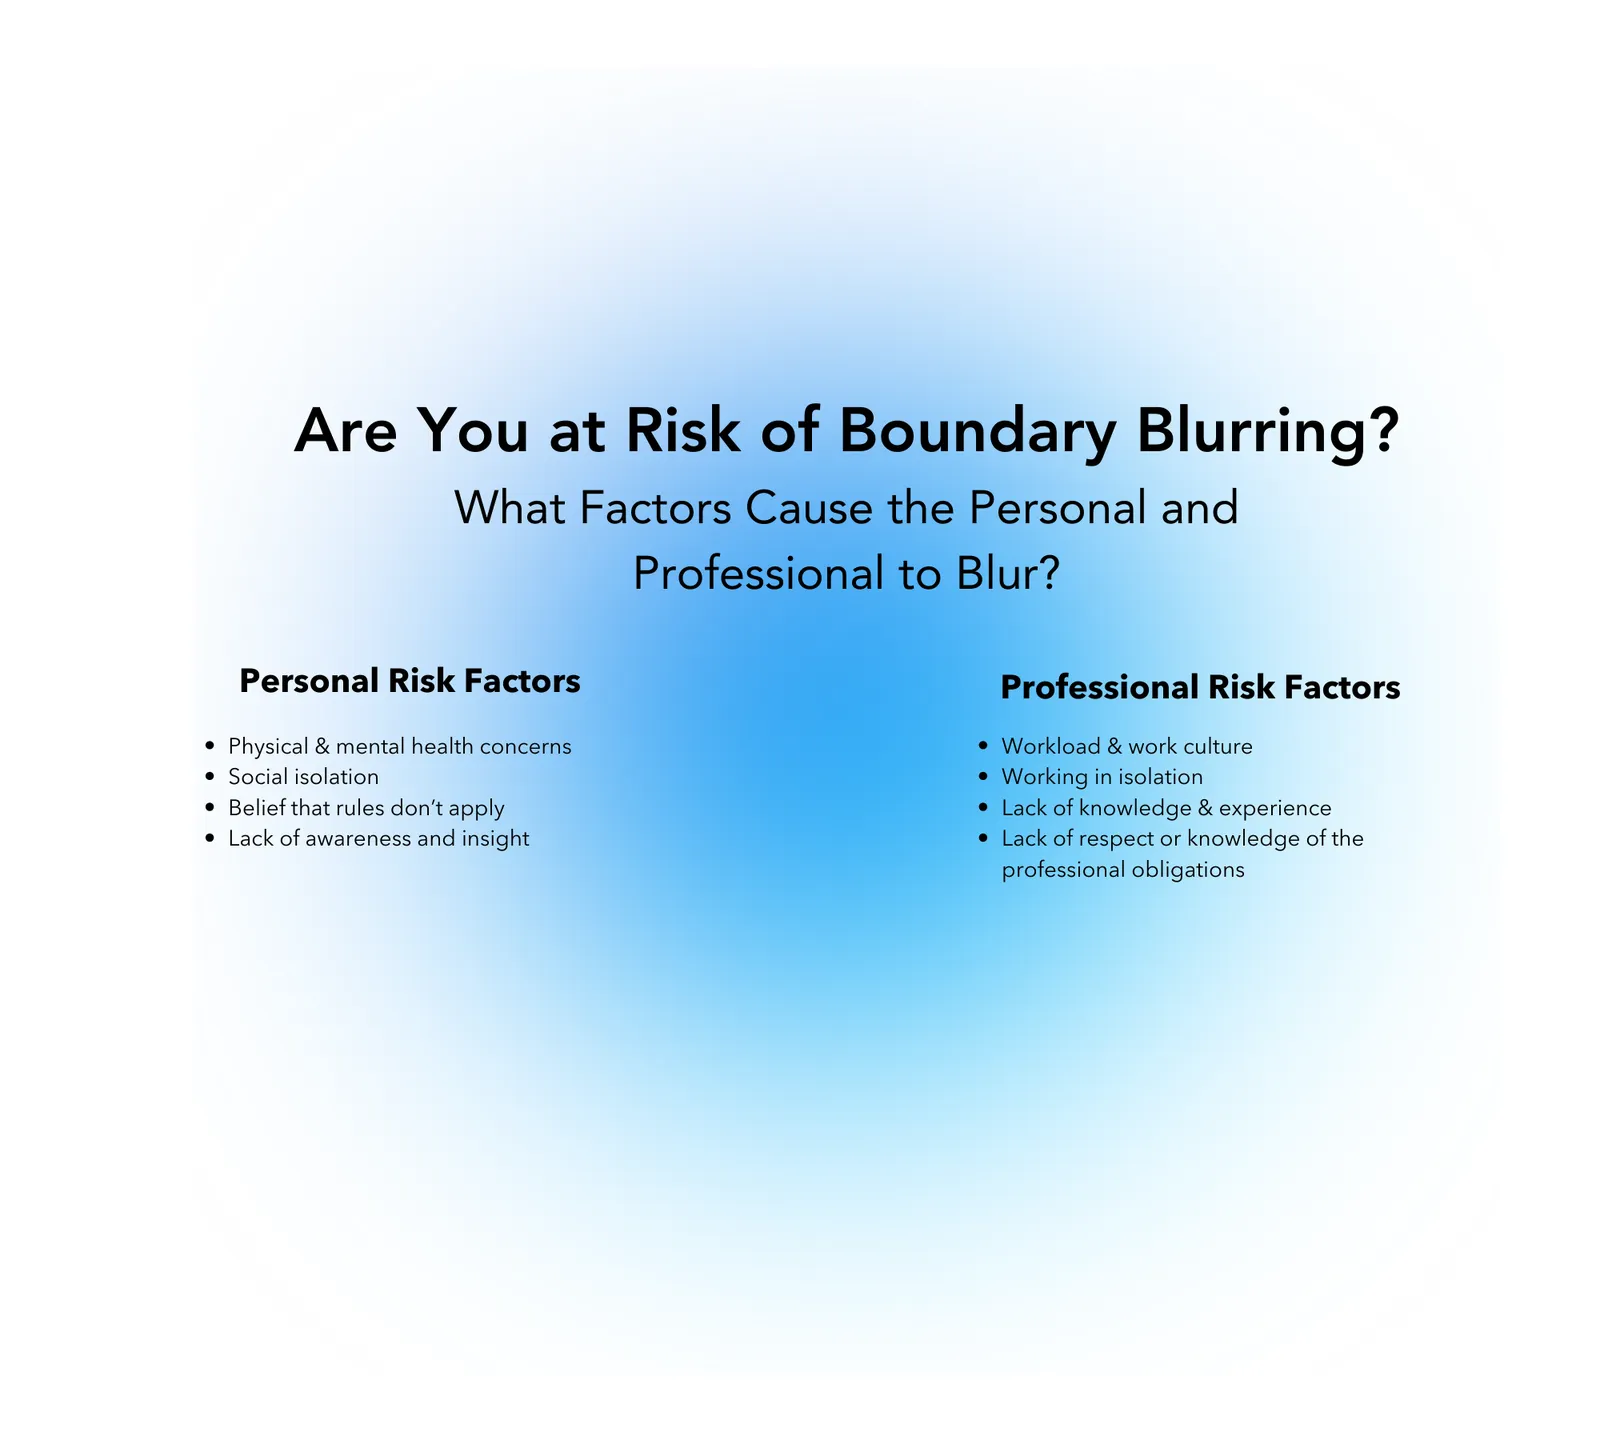 Are you at risk of boundary blurring?